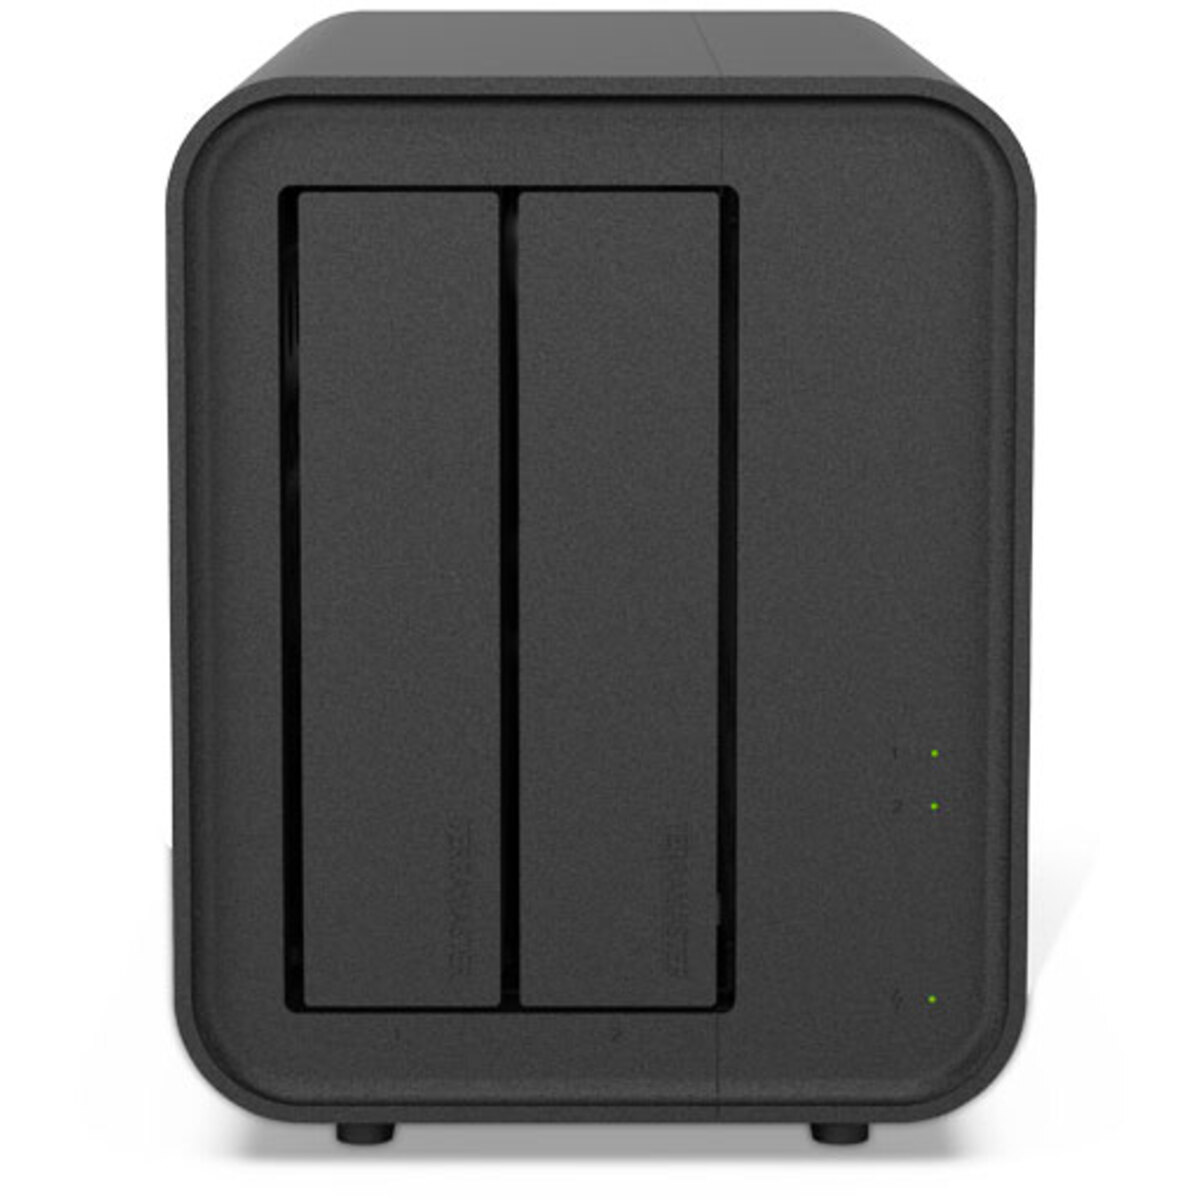 TerraMaster D5 Hybrid 8tb 2-Bay Desktop Multimedia / Power User / Business DAS - Direct Attached Storage Device 2x4tb Toshiba MN Series MN08ADA400E 3.5 7200rpm SATA 6Gb/s HDD NAS Class Drives Installed - Burn-In Tested - ON SALE D5 Hybrid